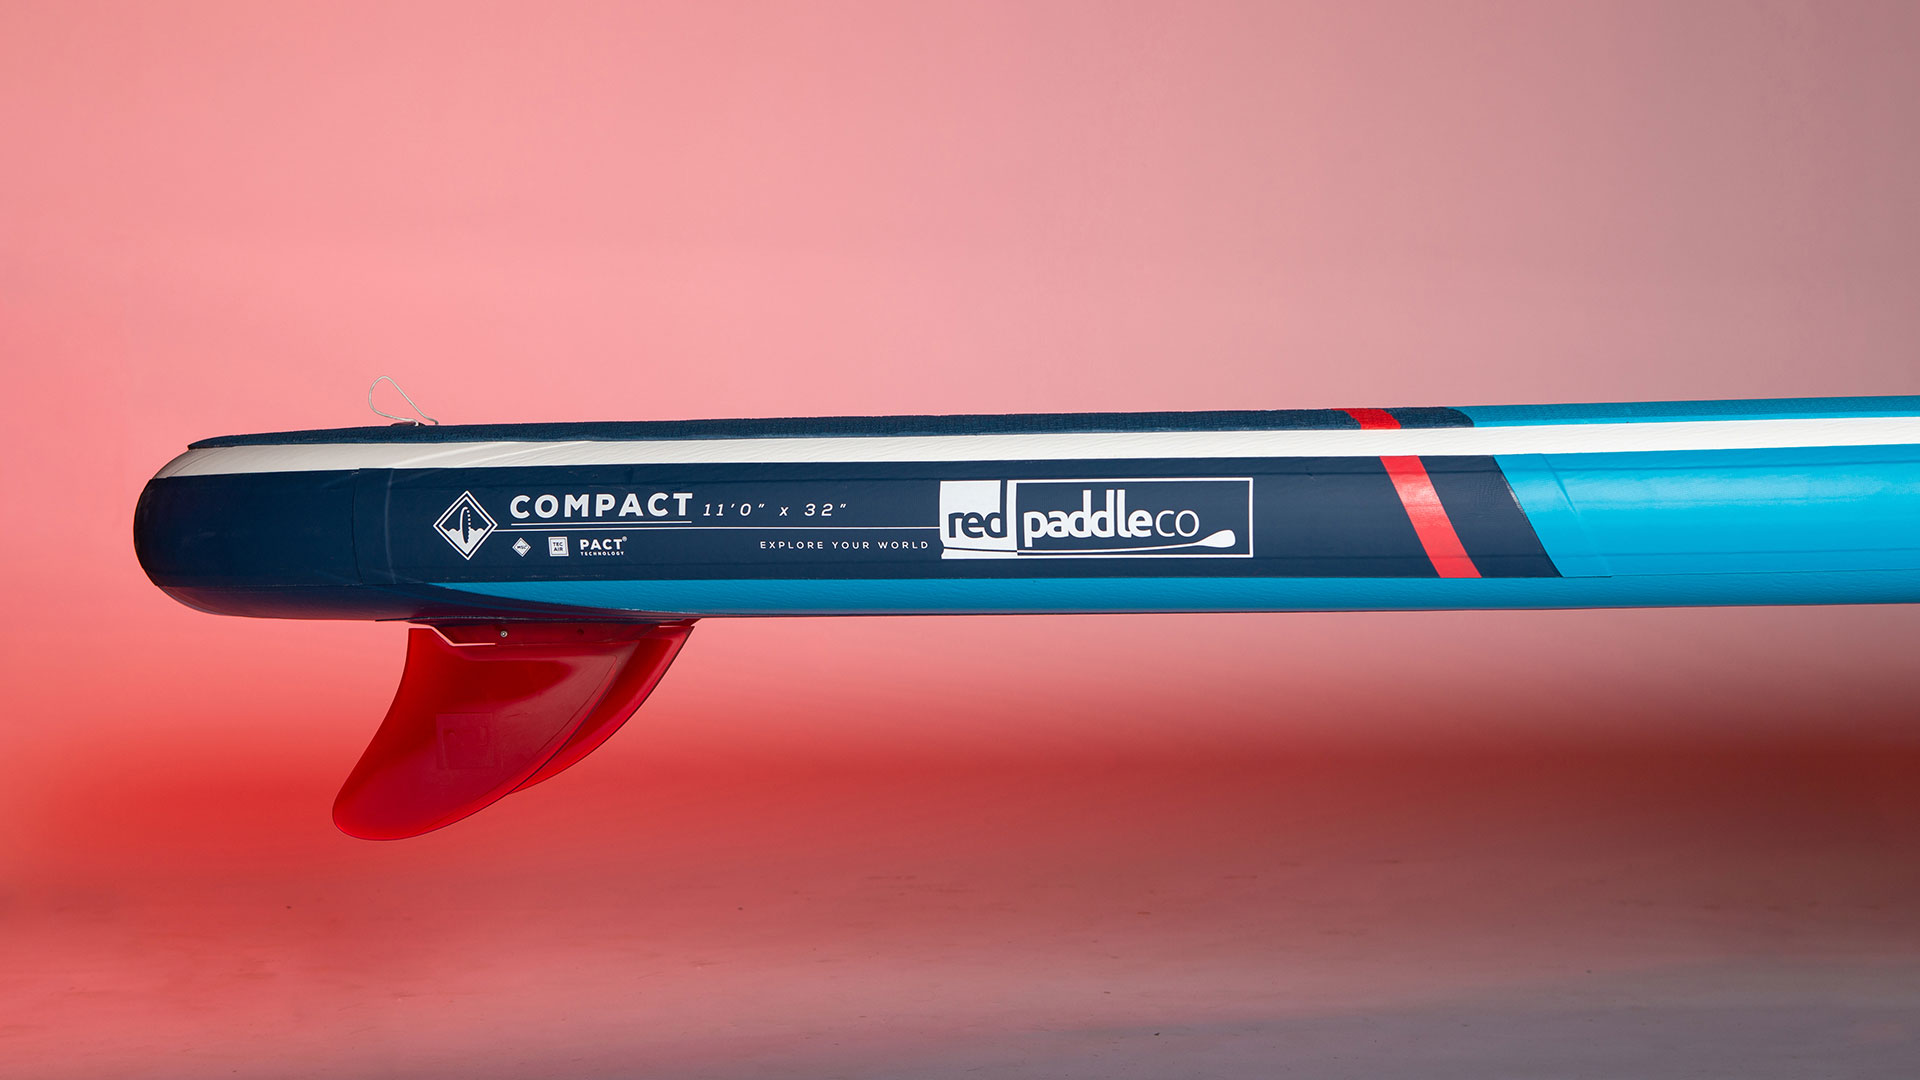 red-paddle-co-paddleboard-compact-11-5